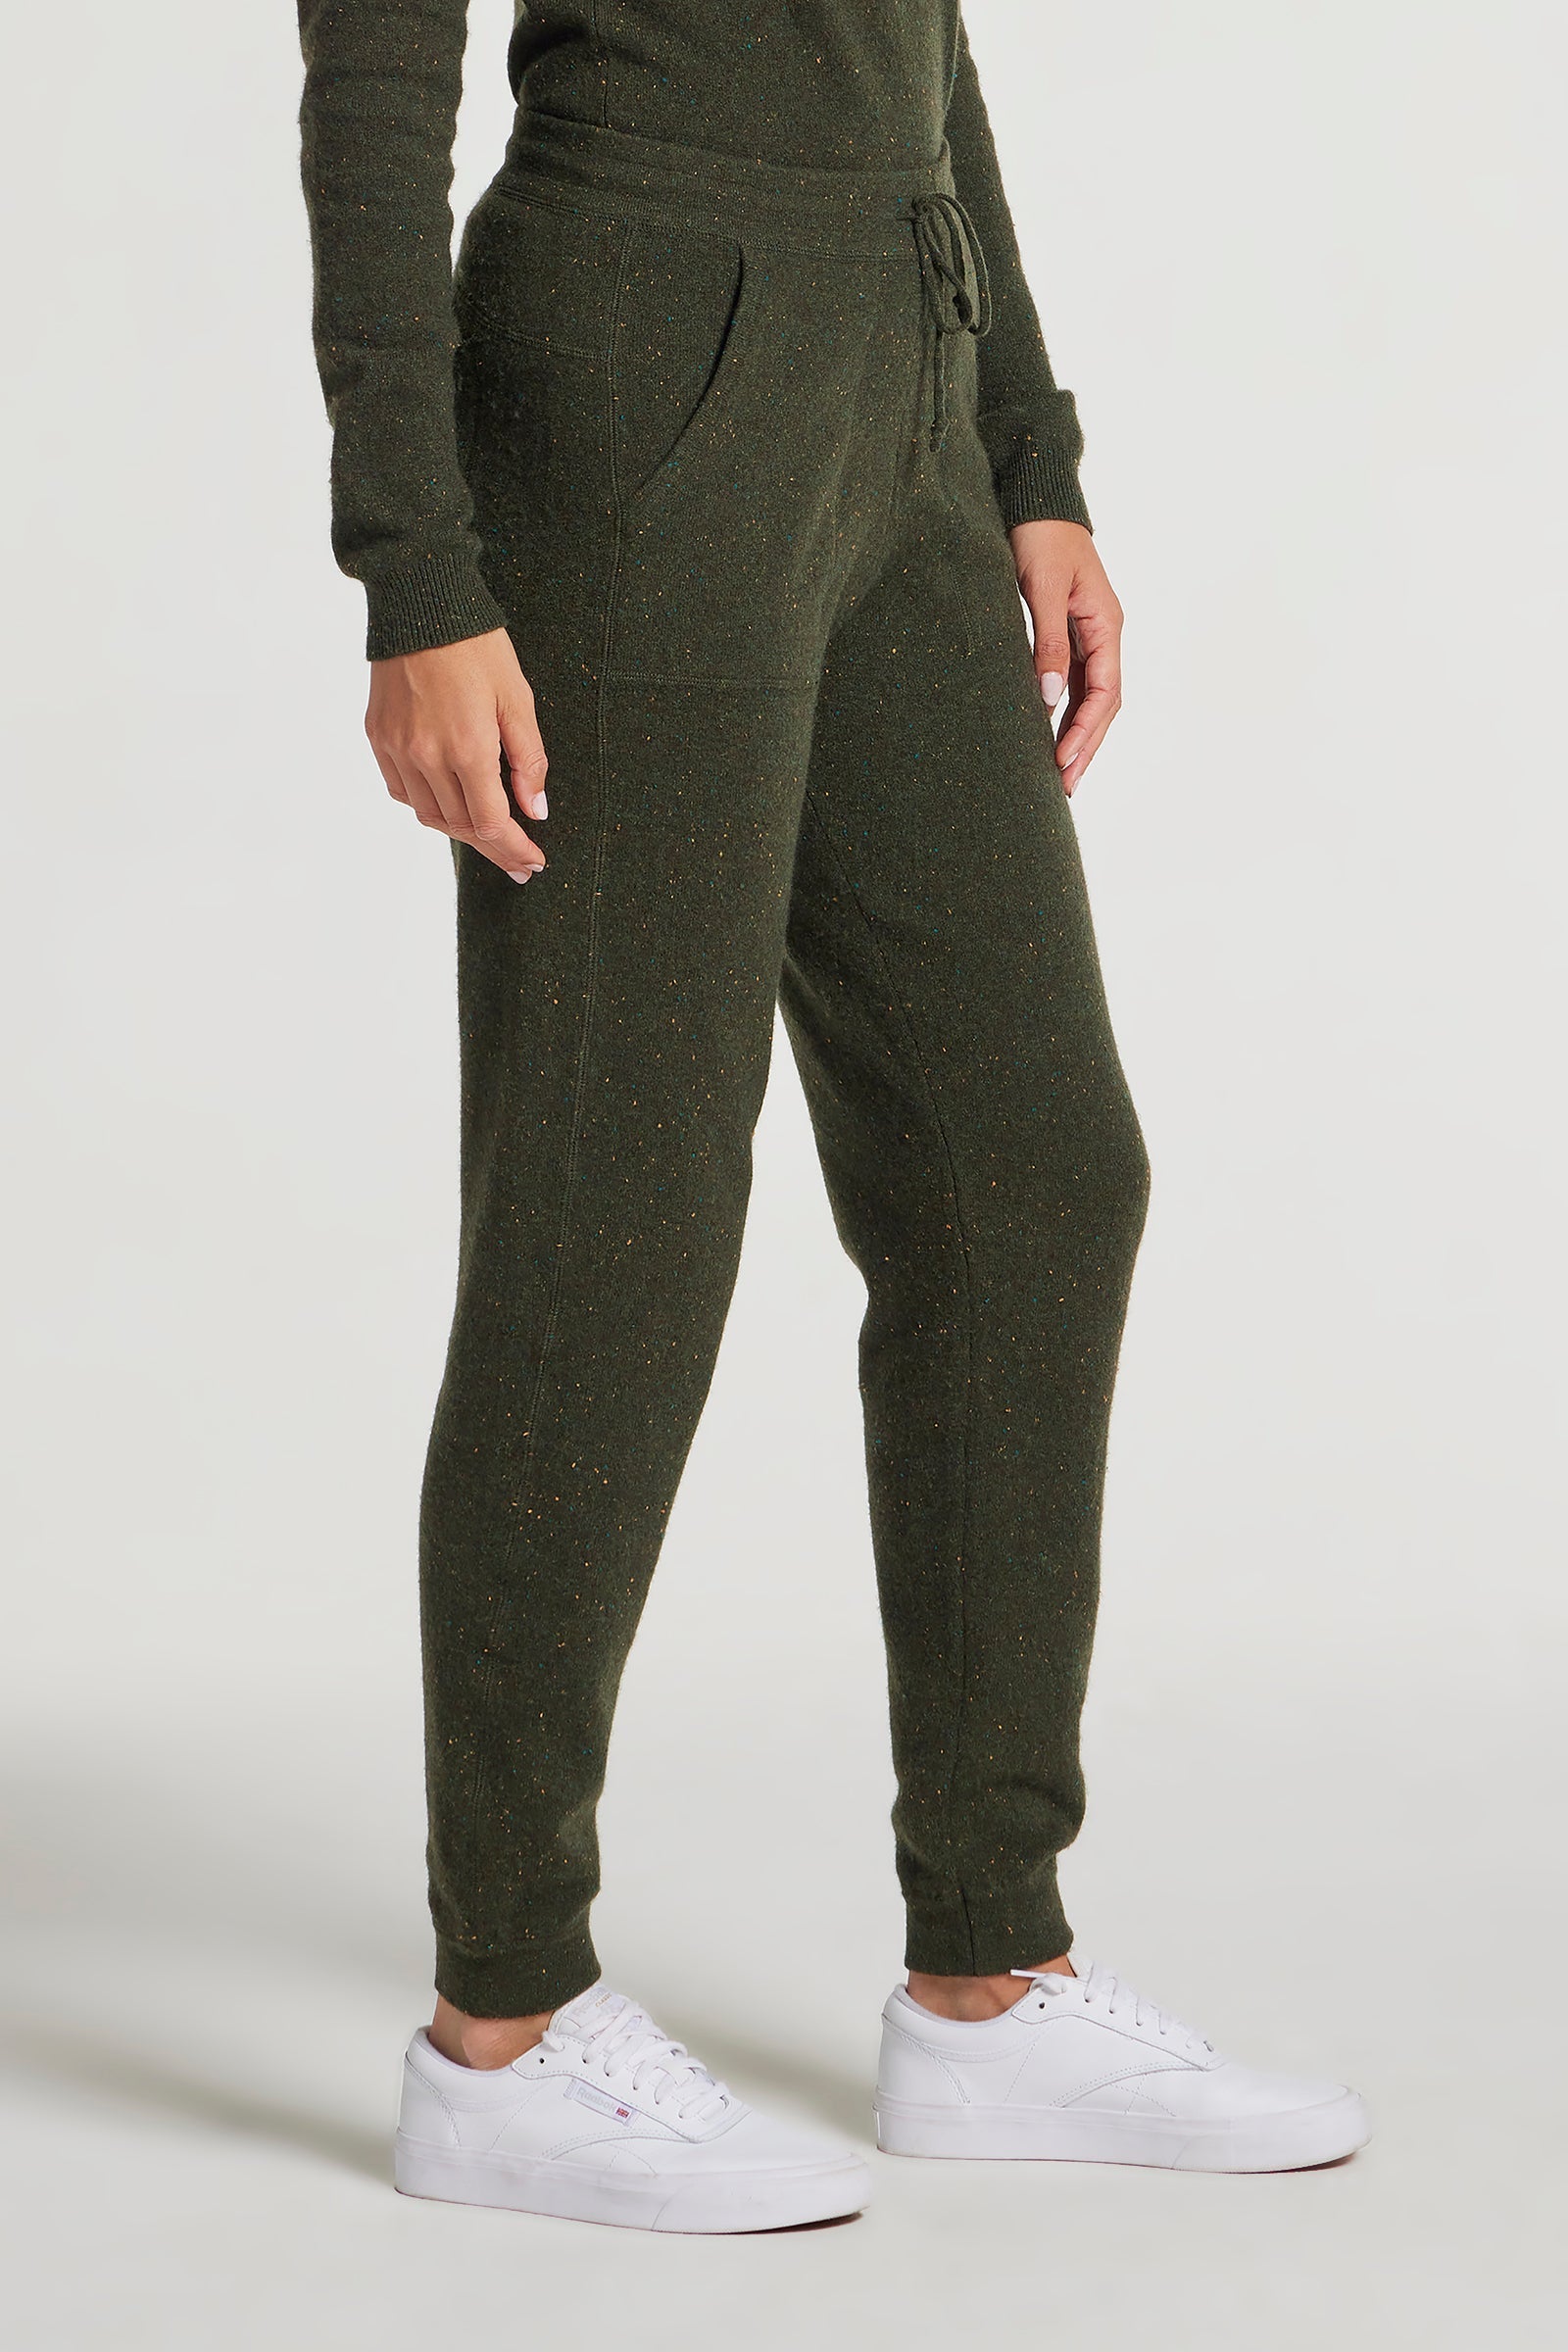 ARMY GREEN || Londone Cashmere Jogger